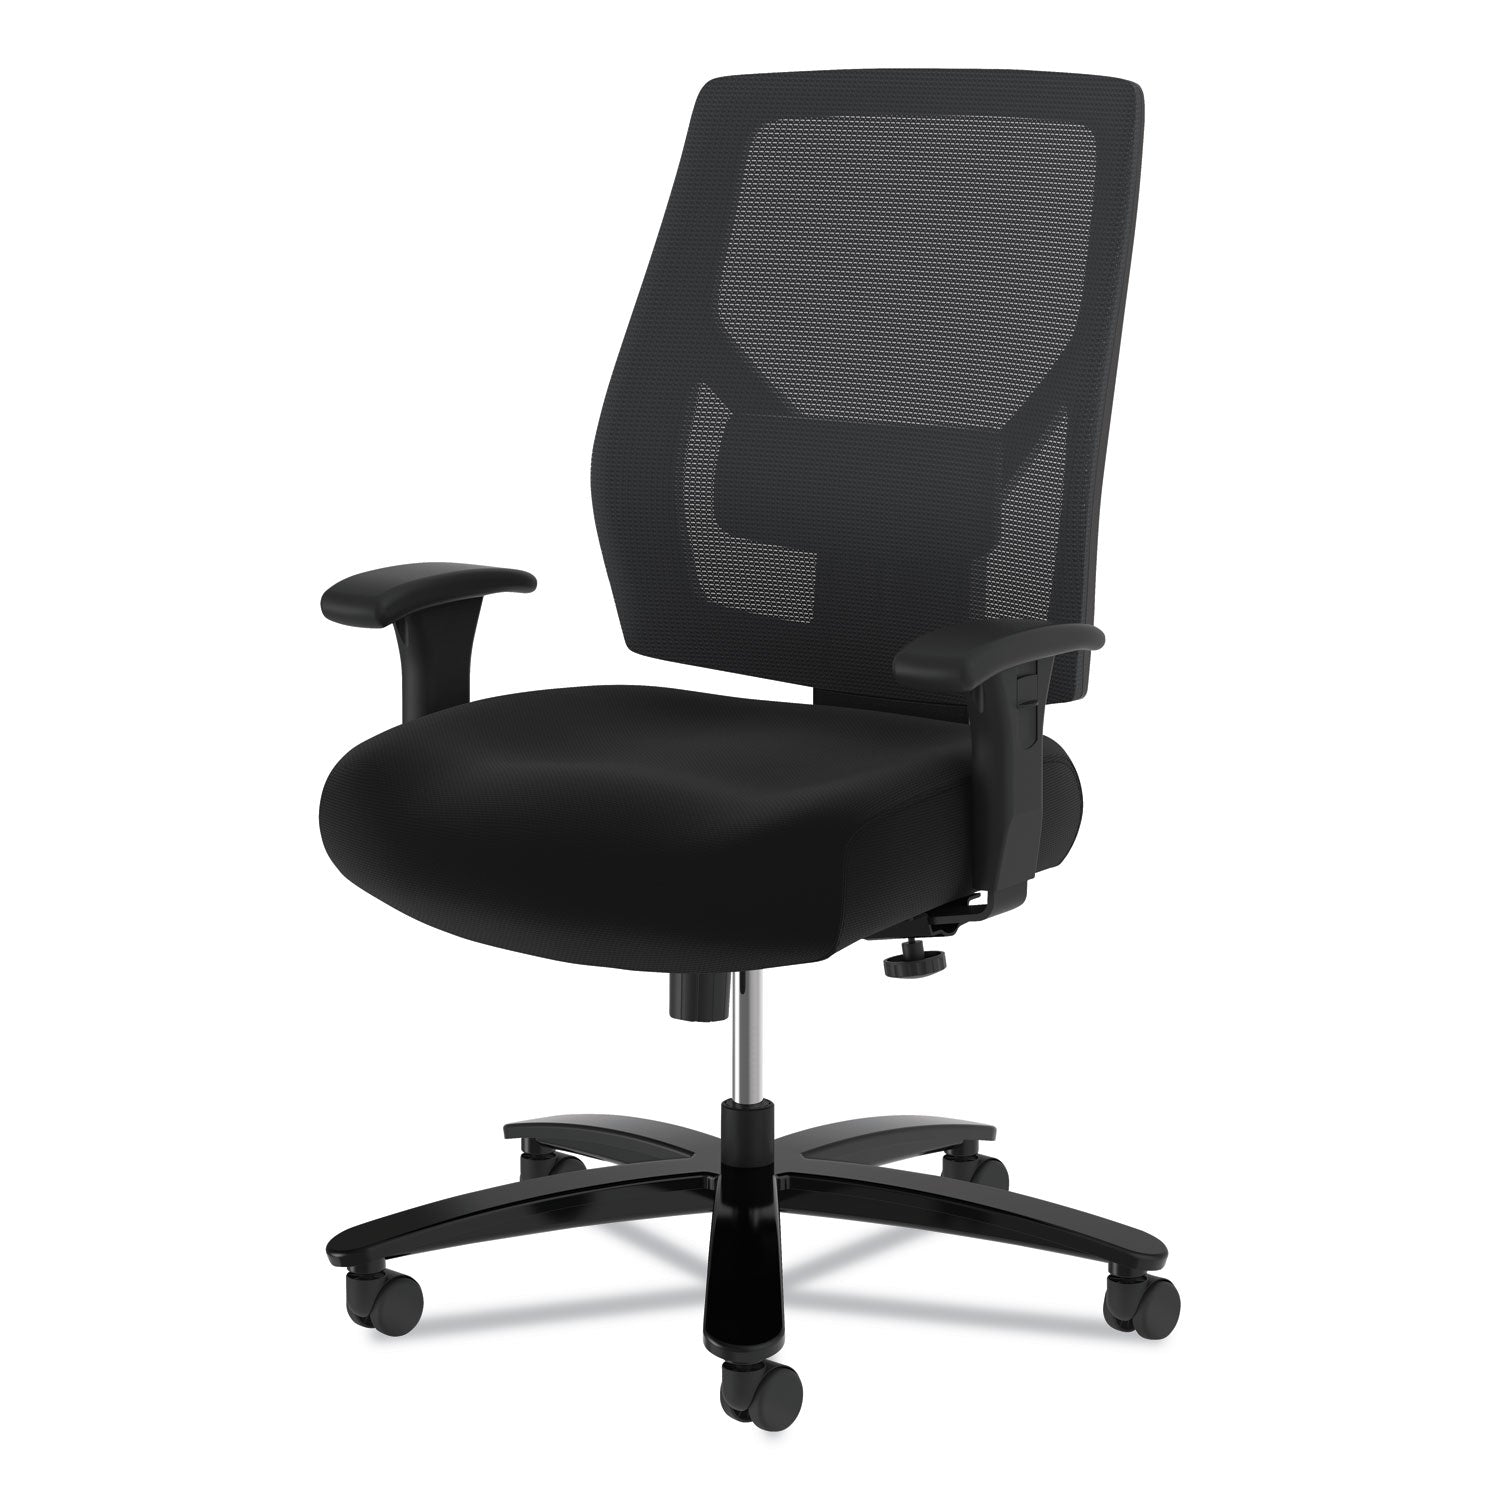 crio-big-and-tall-mid-back-task-chair-supports-up-to-450-lb-18-to-22-seat-height-black_bsxvl585es10t - 3